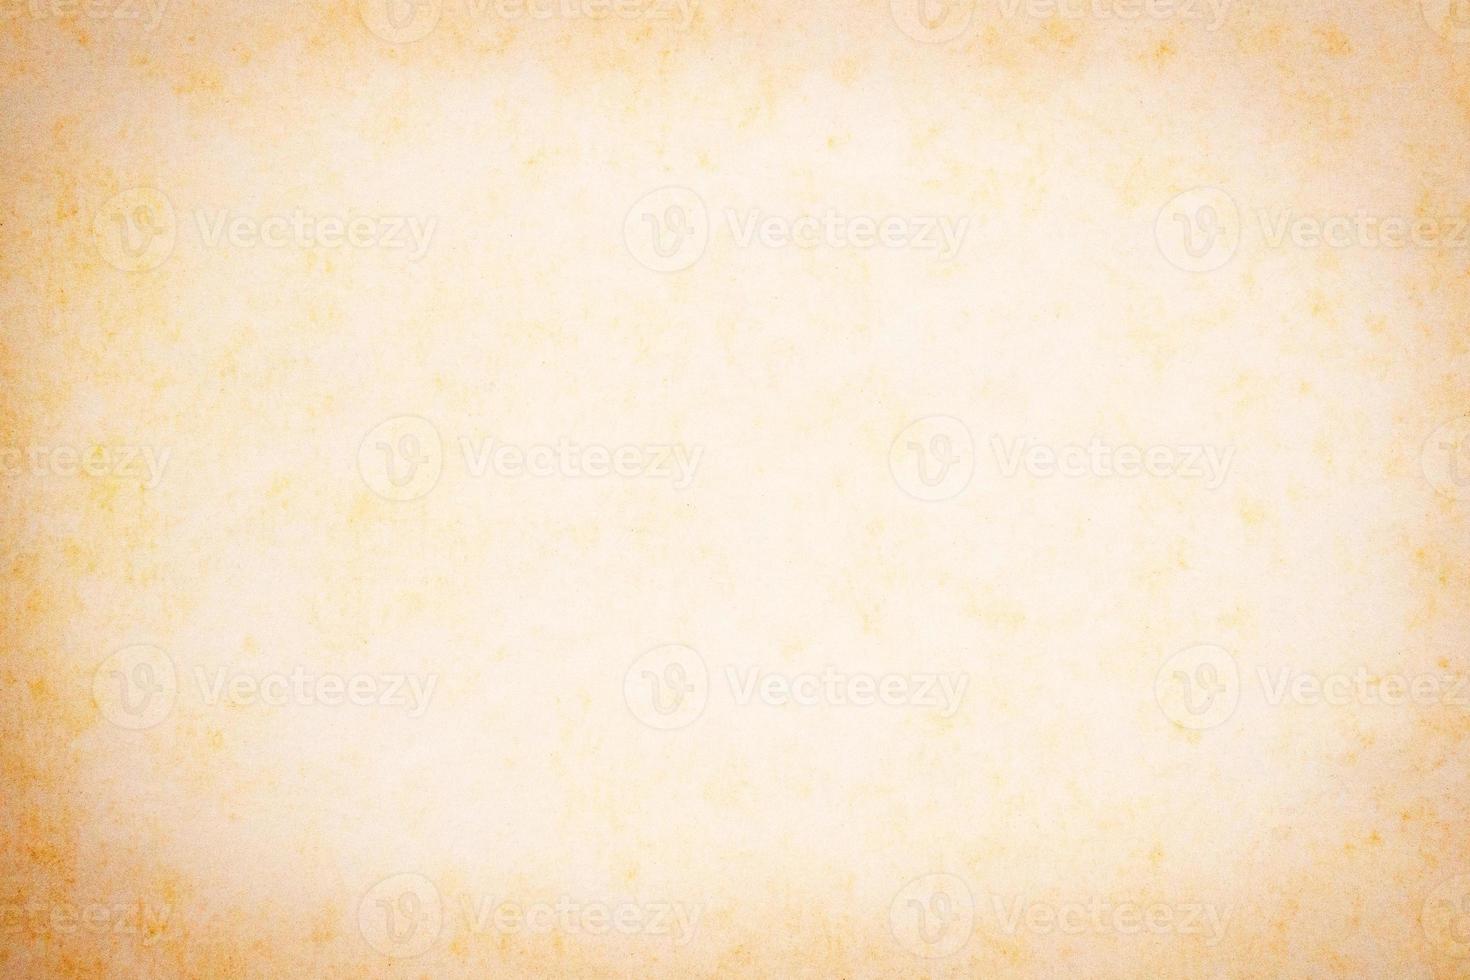 Old vintage paper texture background 12884932 Stock Photo at Vecteezy